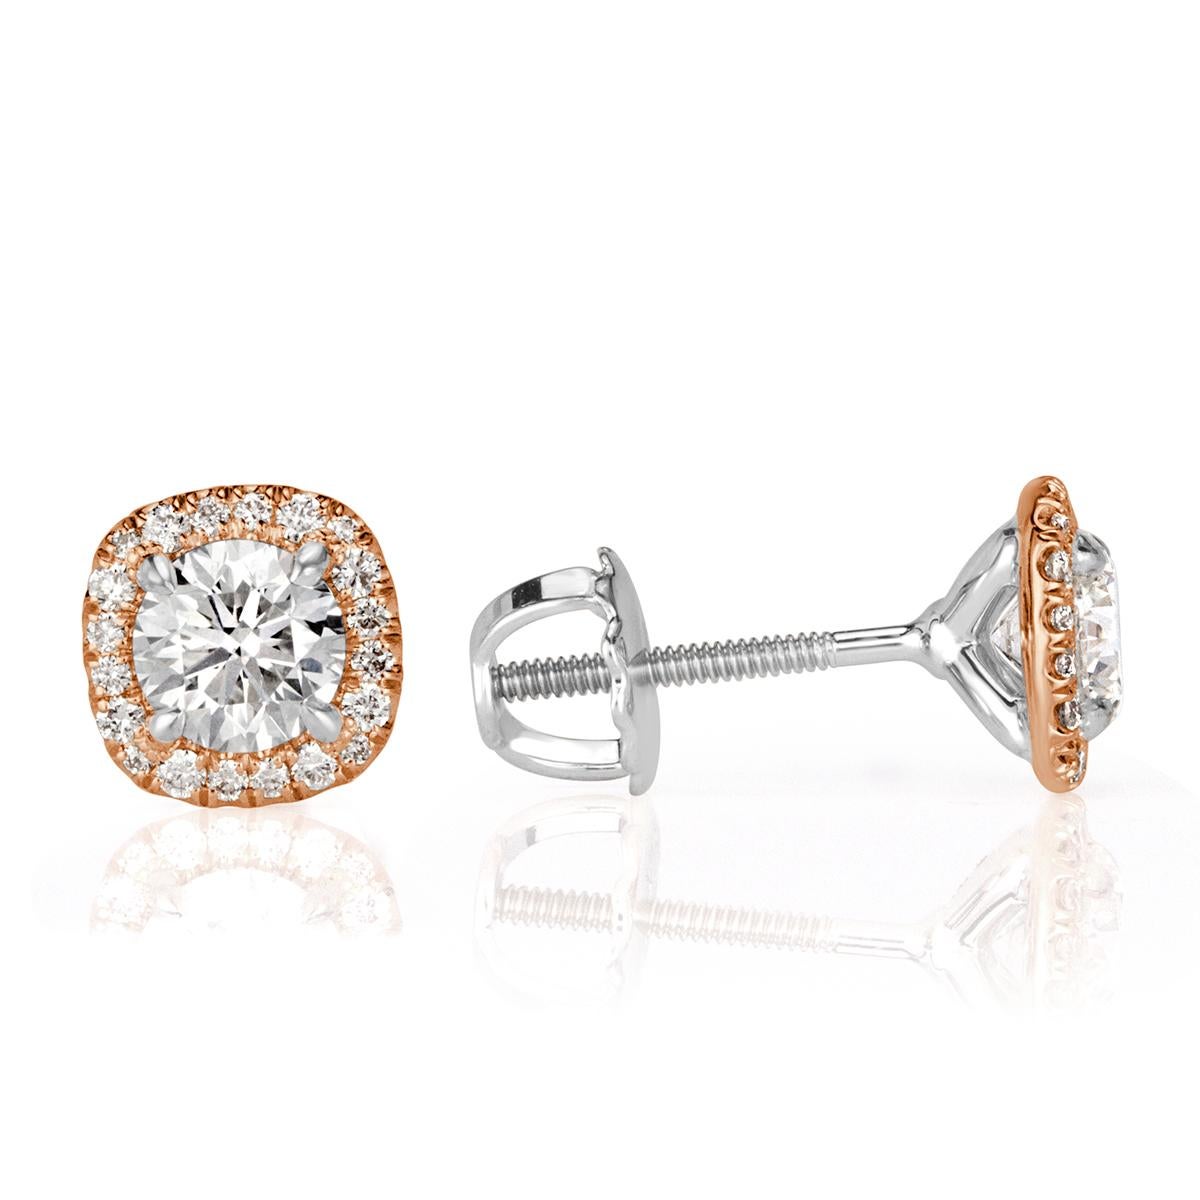 Custom created in 18k rose gold, this exquisite pair of diamond earrings showcases two larger round brilliant cut diamonds at the center individually surrounded by a shimmering cushion shaped halo of smaller round brilliant cut diamonds. The